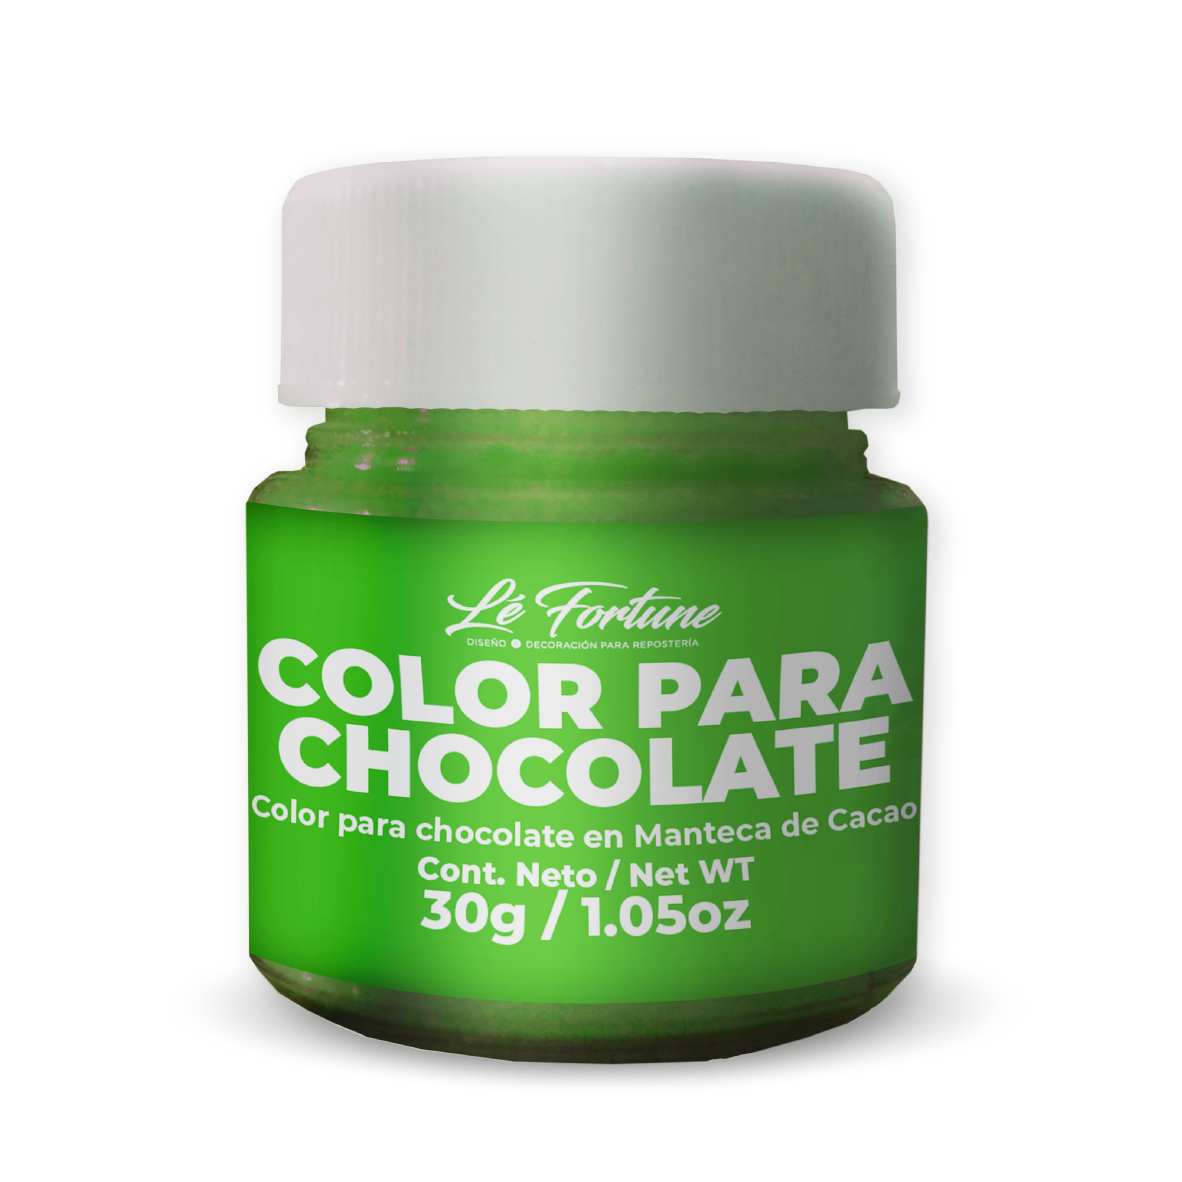 Color para Chocolate Verde Pino - Lé Fortune Store